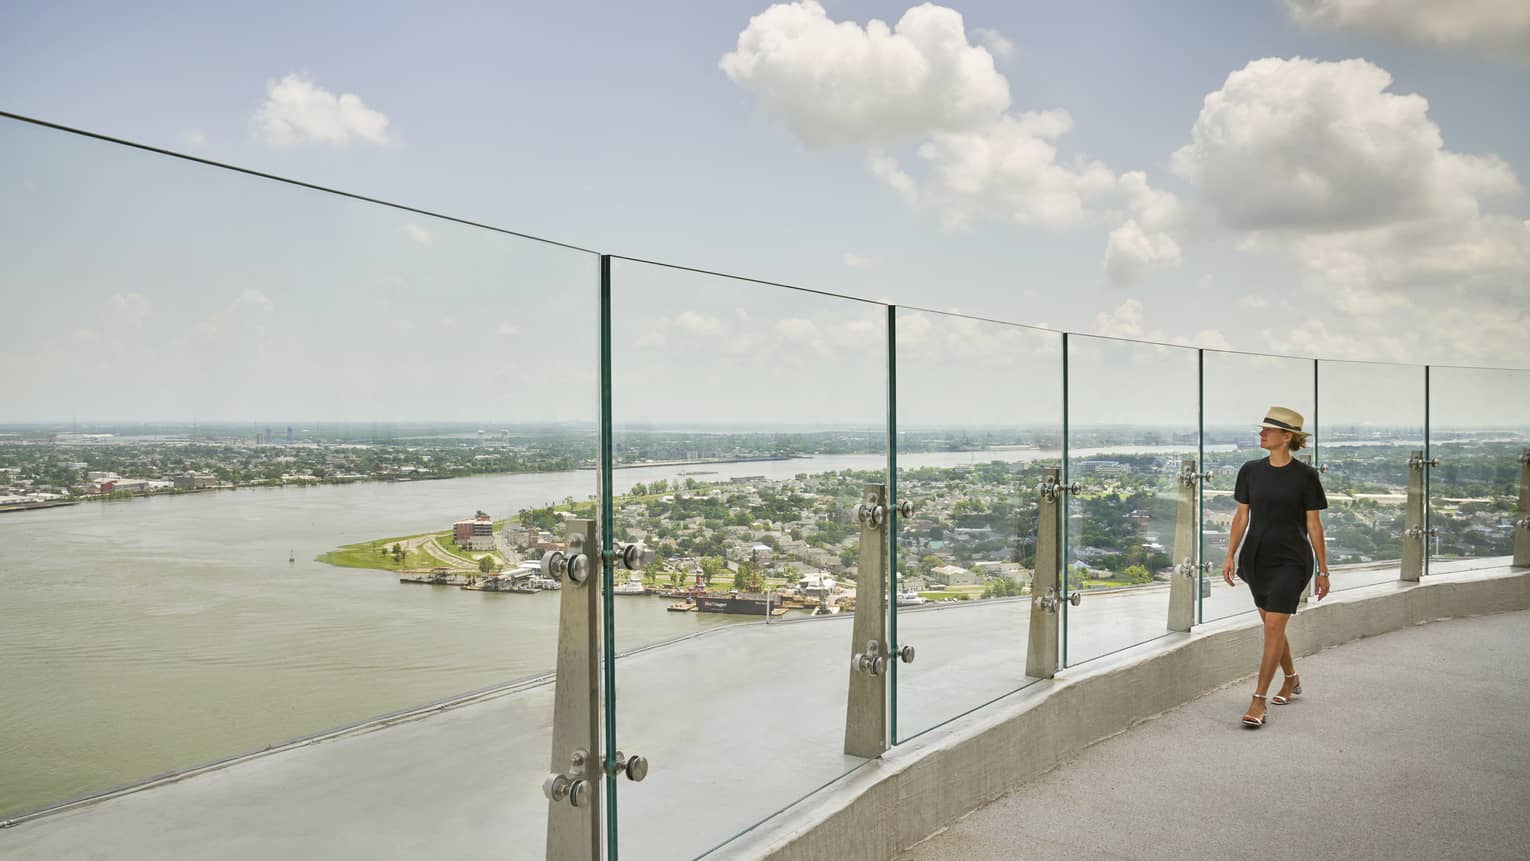 A woman in black clothes walking along a glass wall of an observation deck looking out at a river.